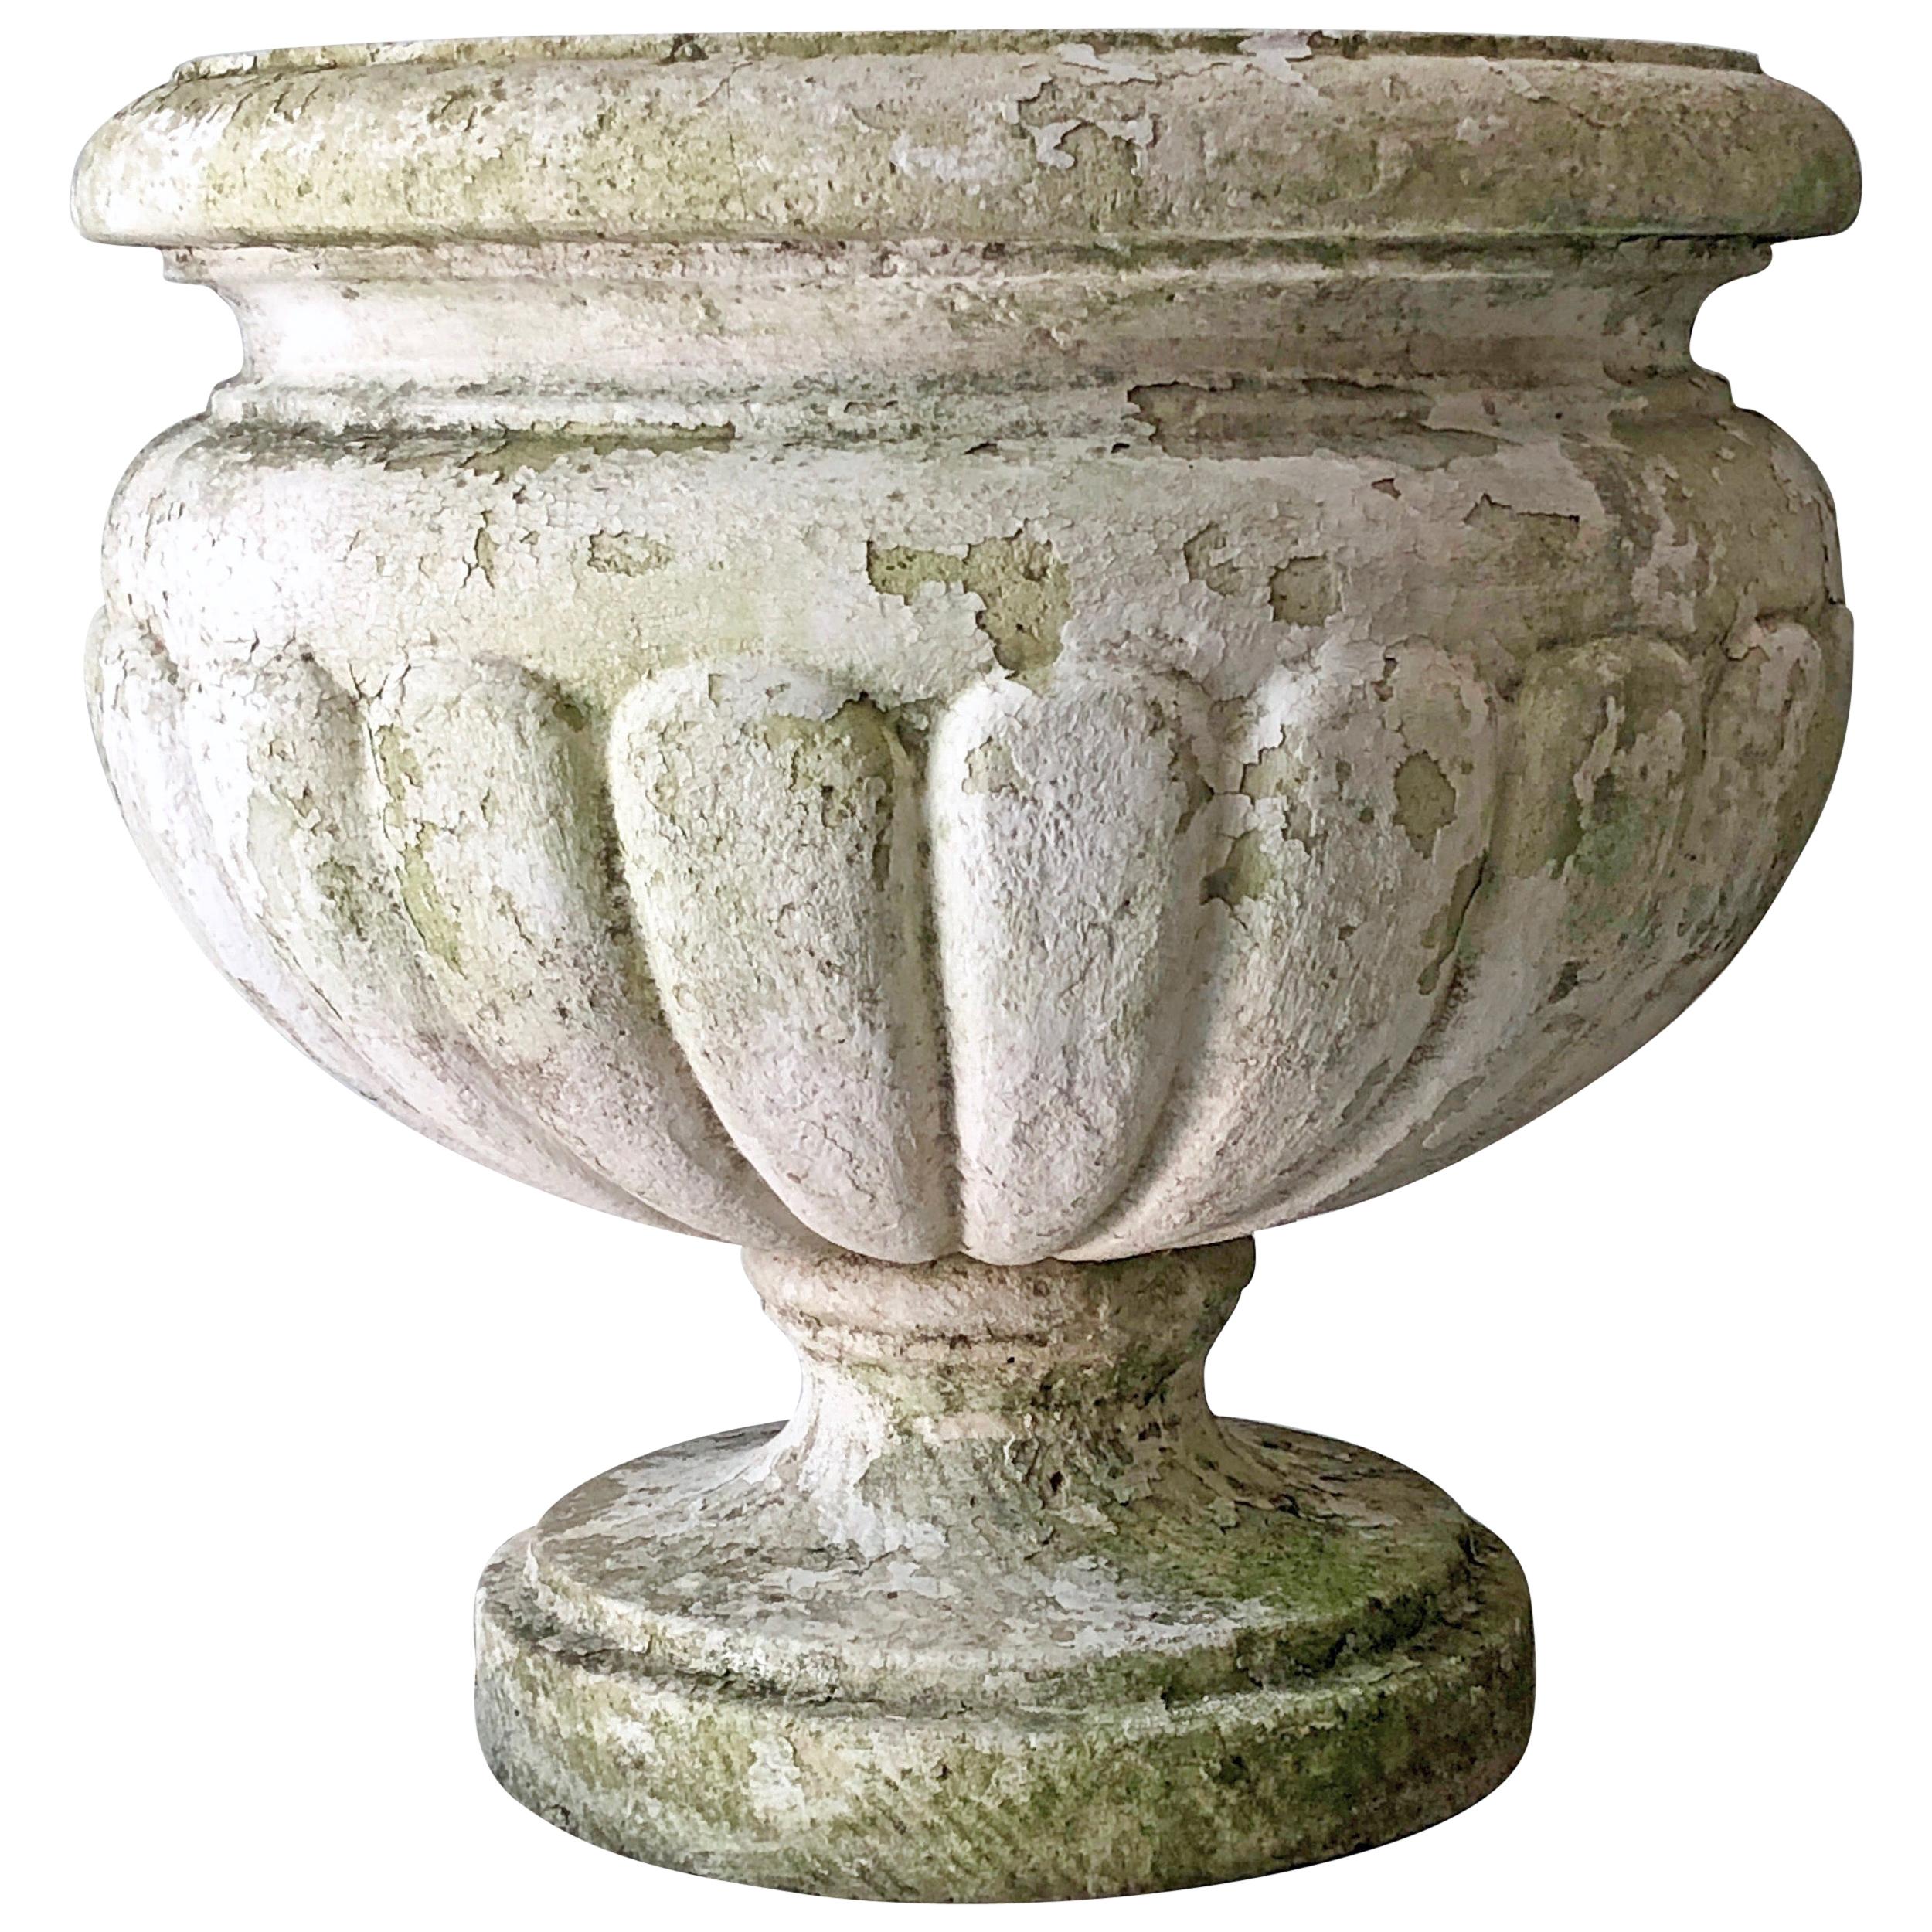 Large 19th Century Two-Piece Patinated and Weathered Stone Jardinière